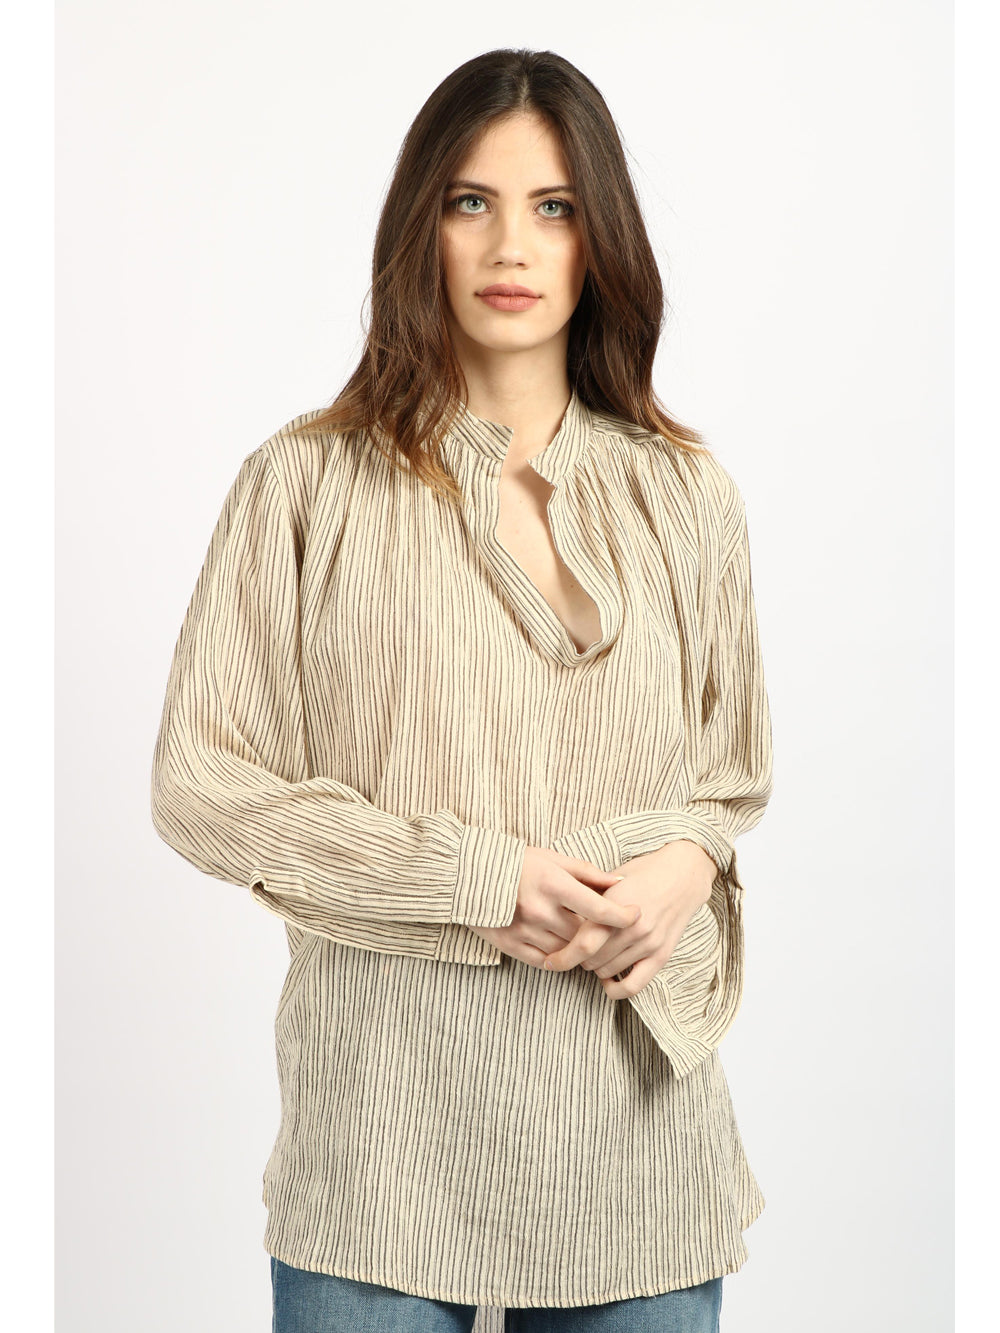 LAURENCE BRAS Blusa Over Beige a Righe Marroni Bianco Marrone